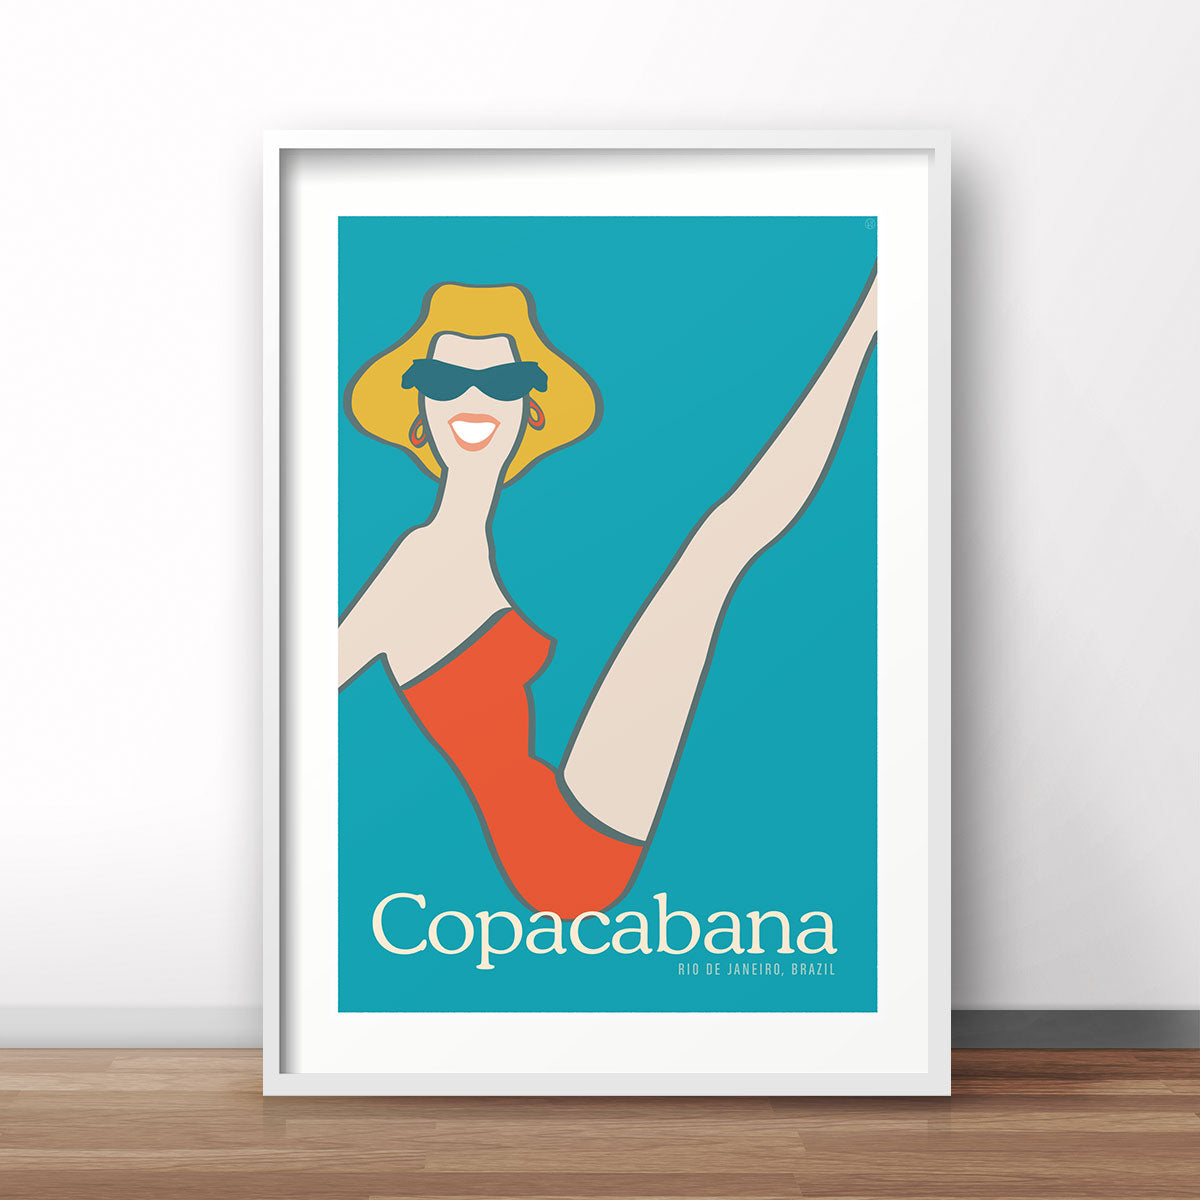 Copacabana Beach retro vintage poster from Places We Luv 